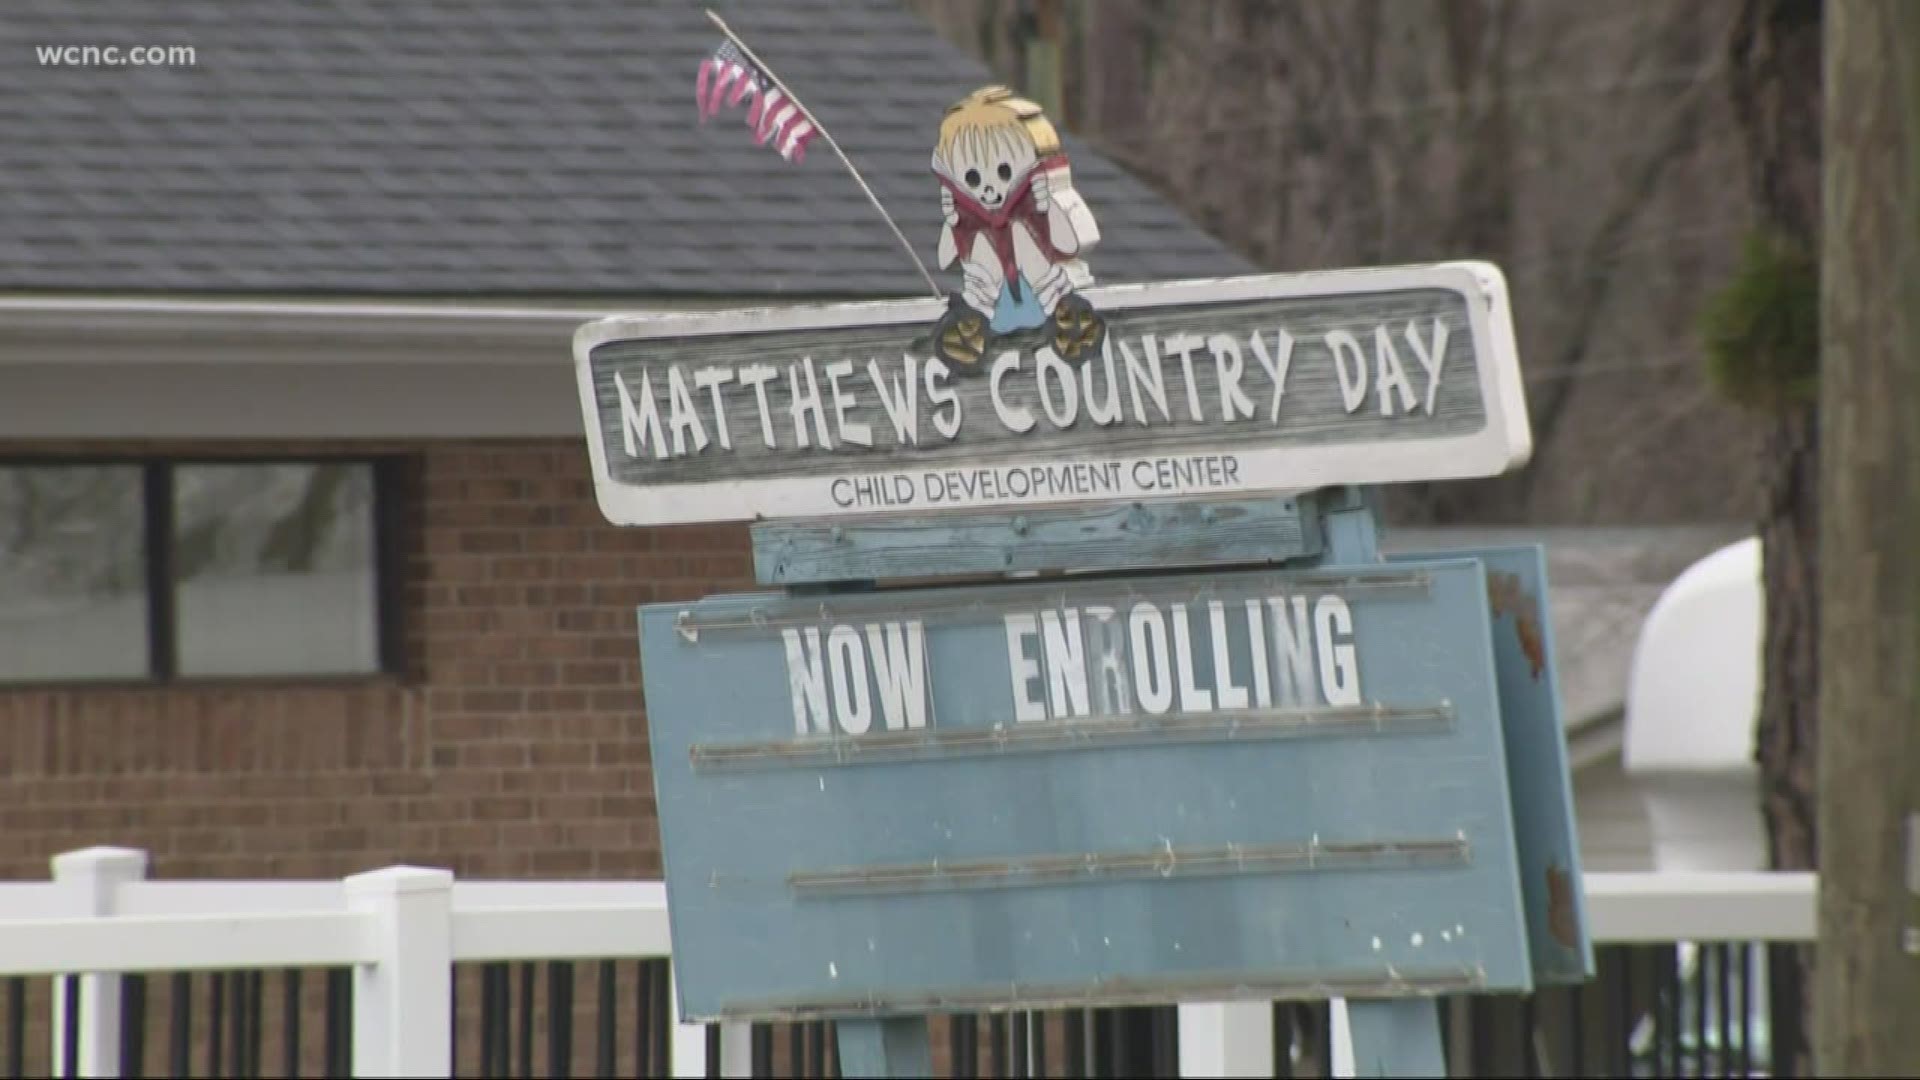 A daycare in Matthews had a possible exposure in the toddler room. Now, some are wondering if daycares should be closed as schools have been.